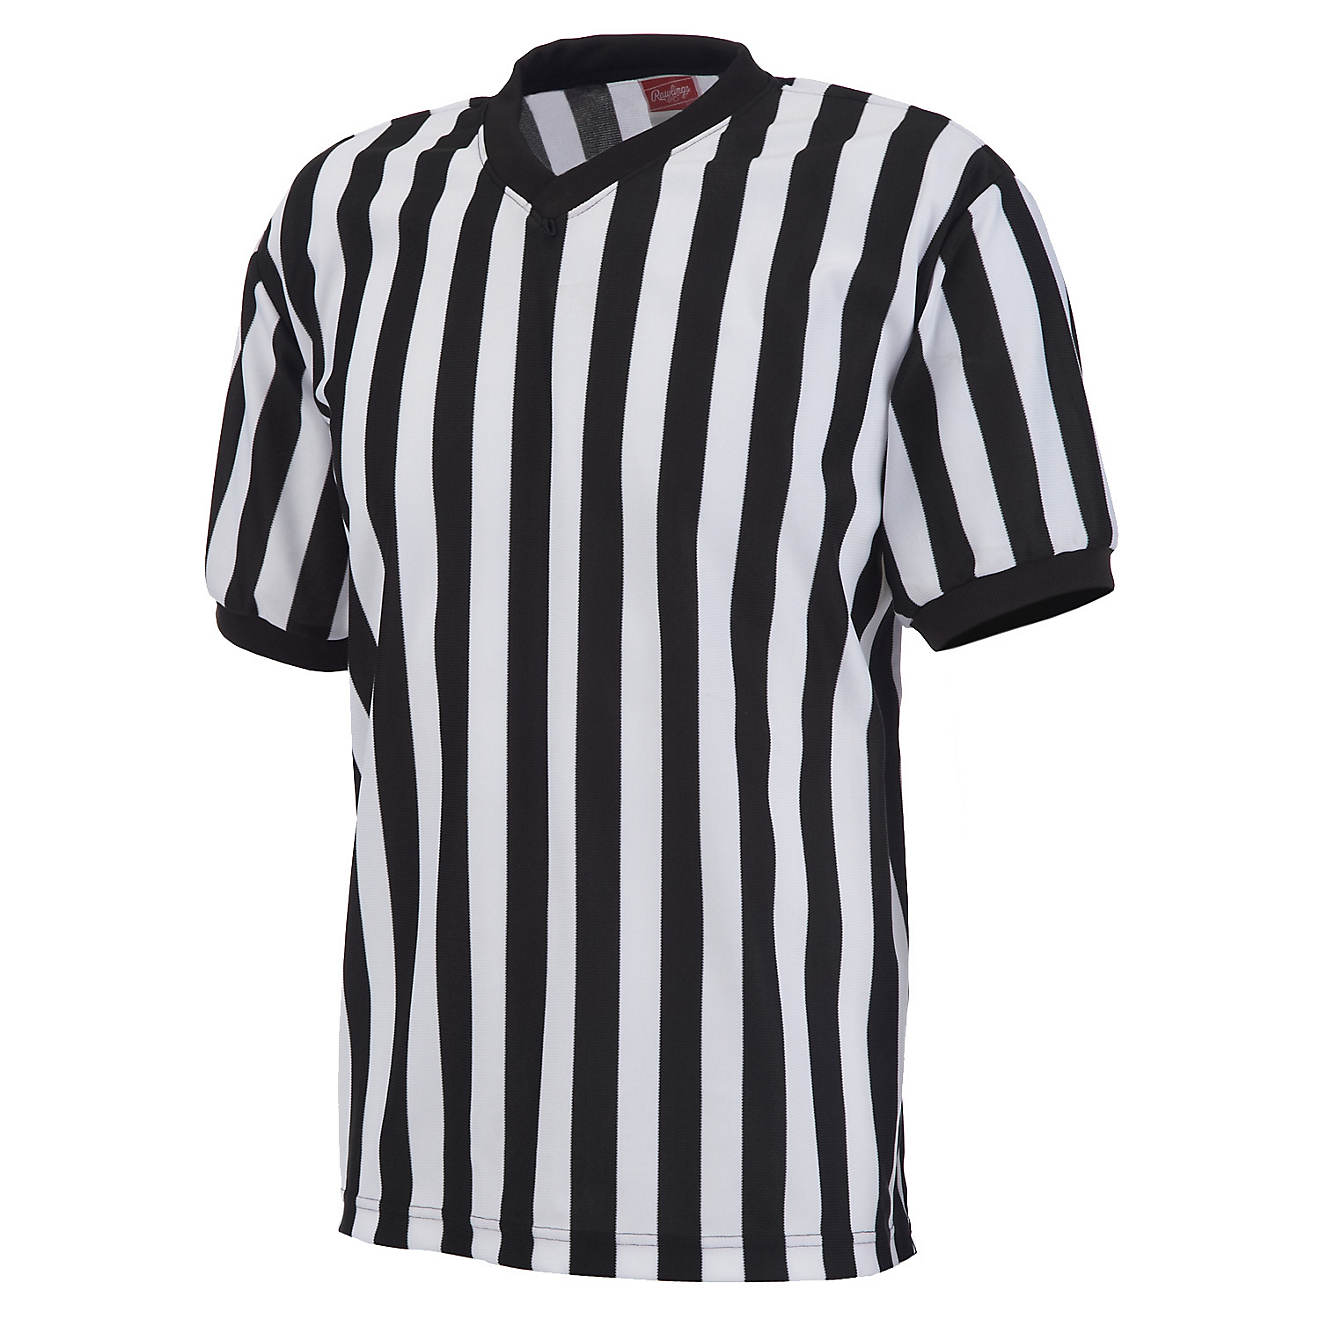 nba referee jersey for sale